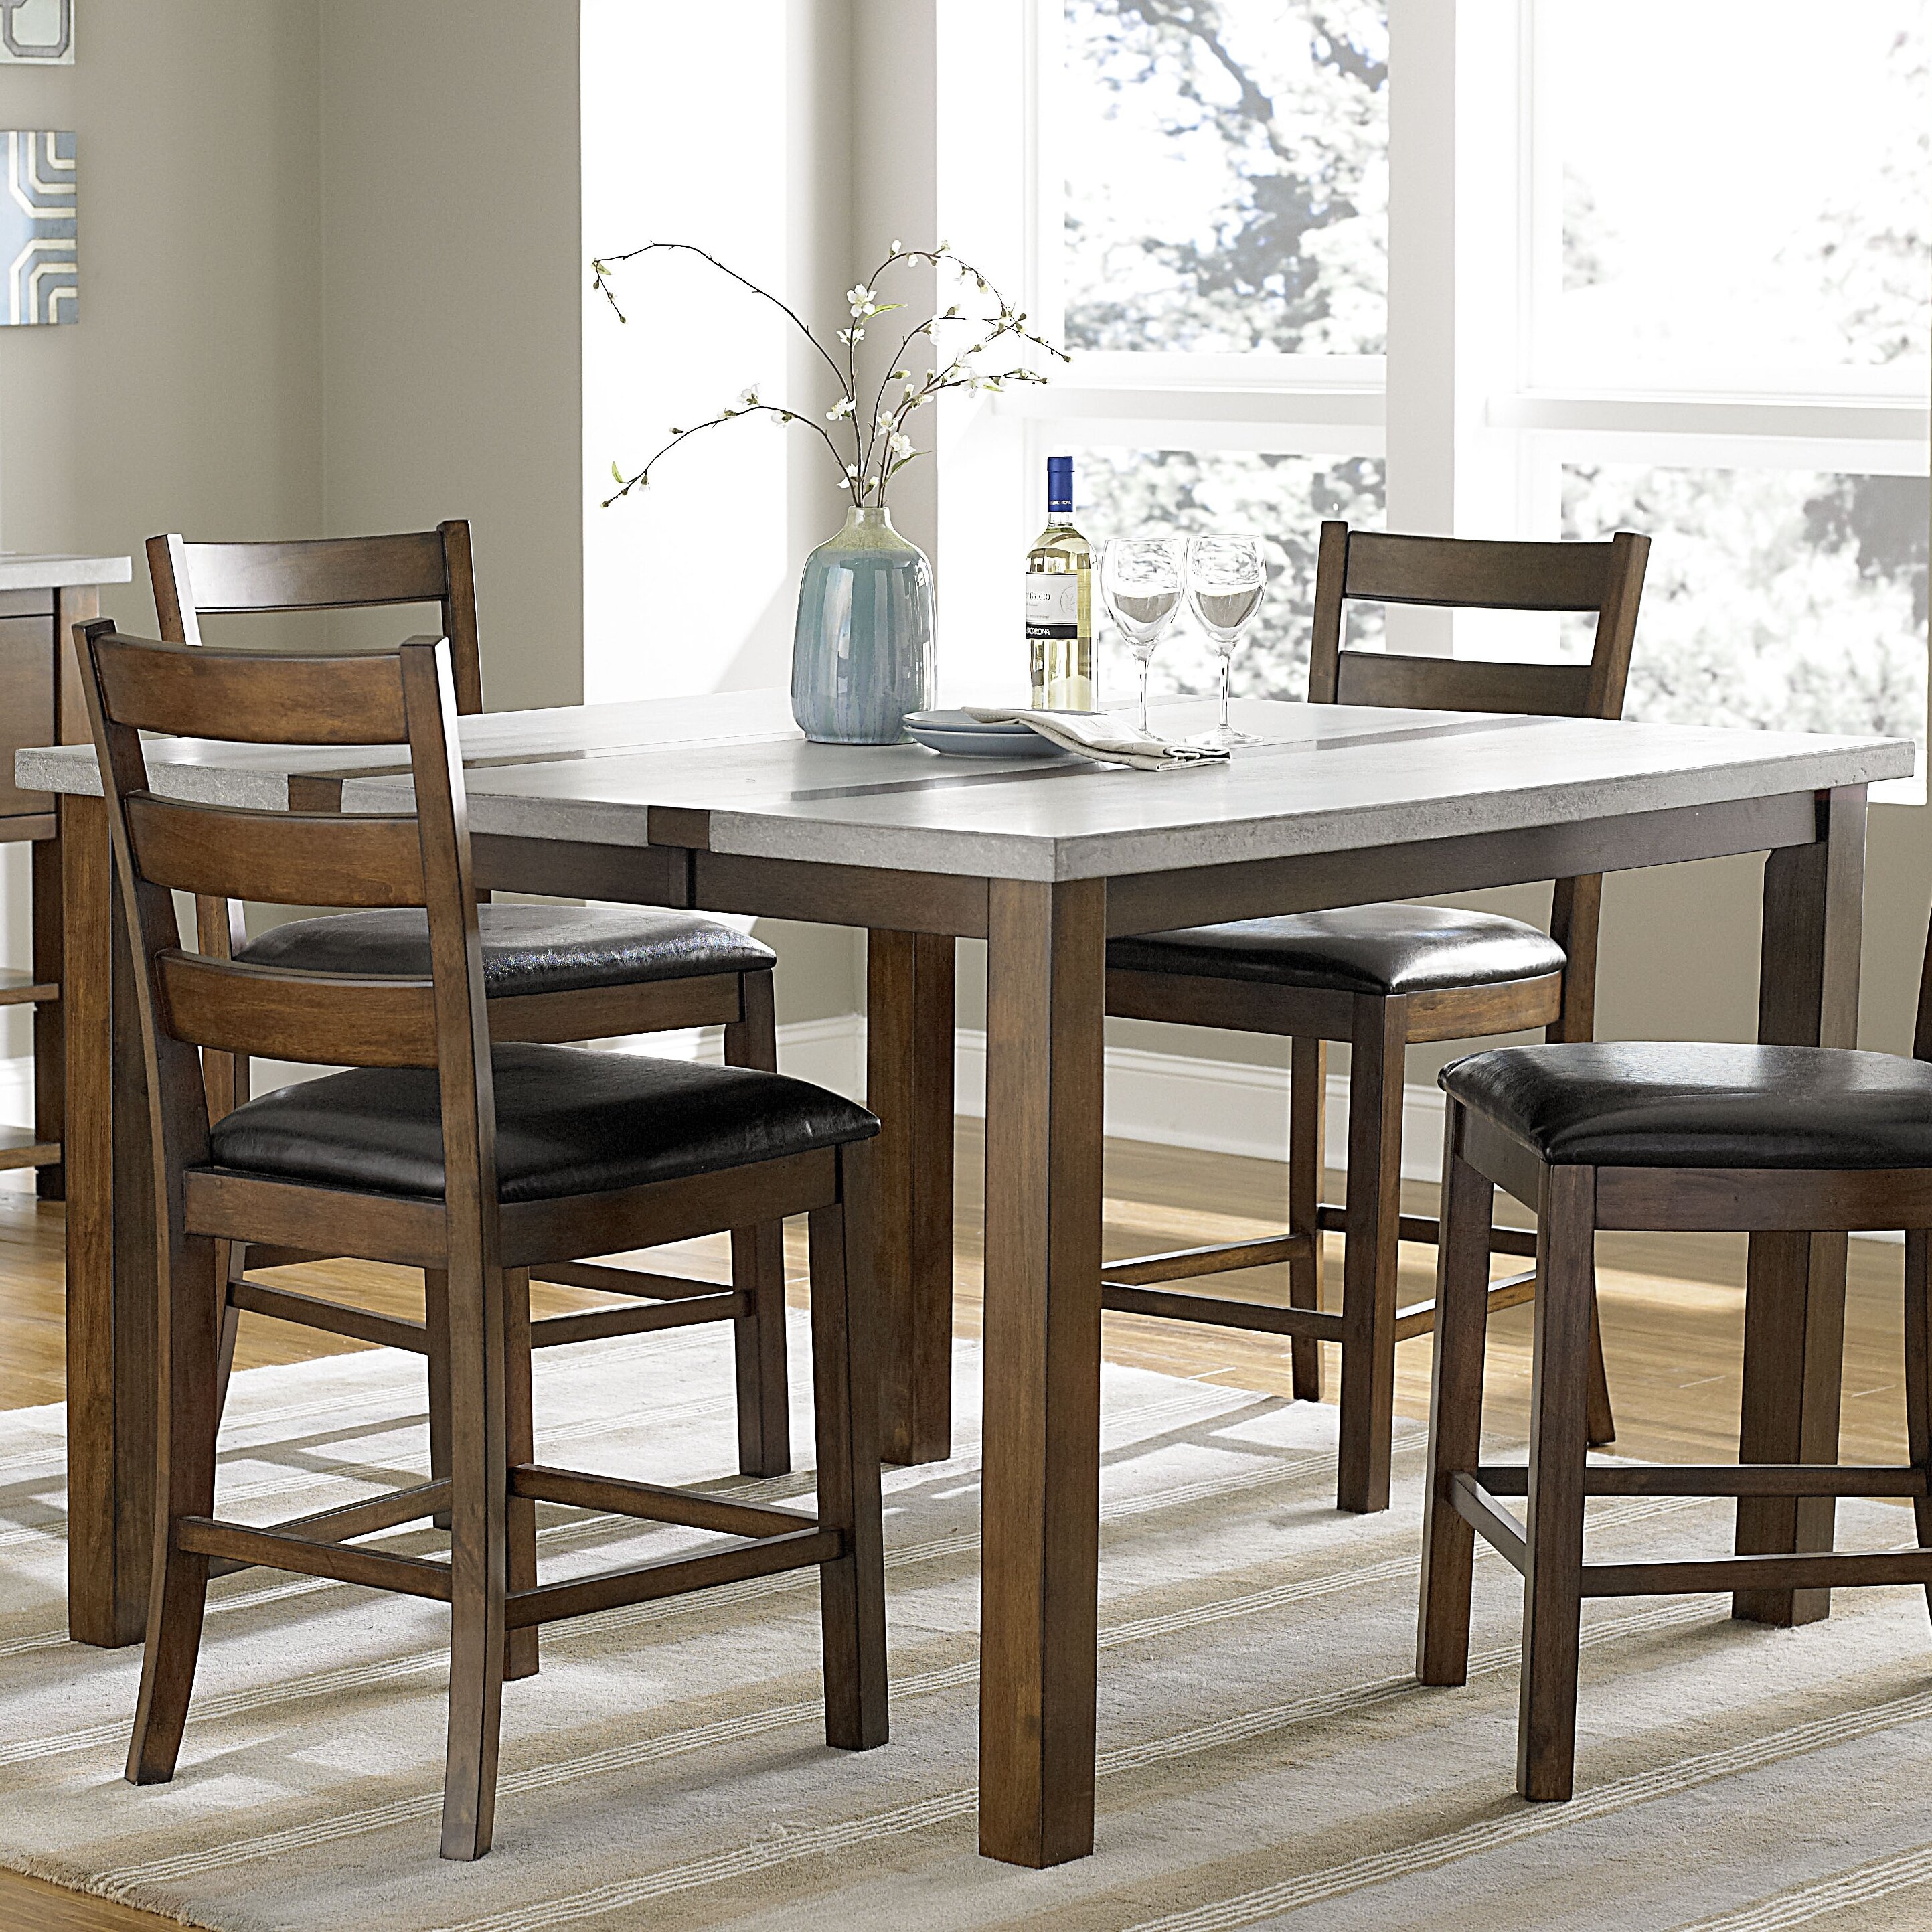 Germaine Counter Height Extendable Dining Table | Wayfair